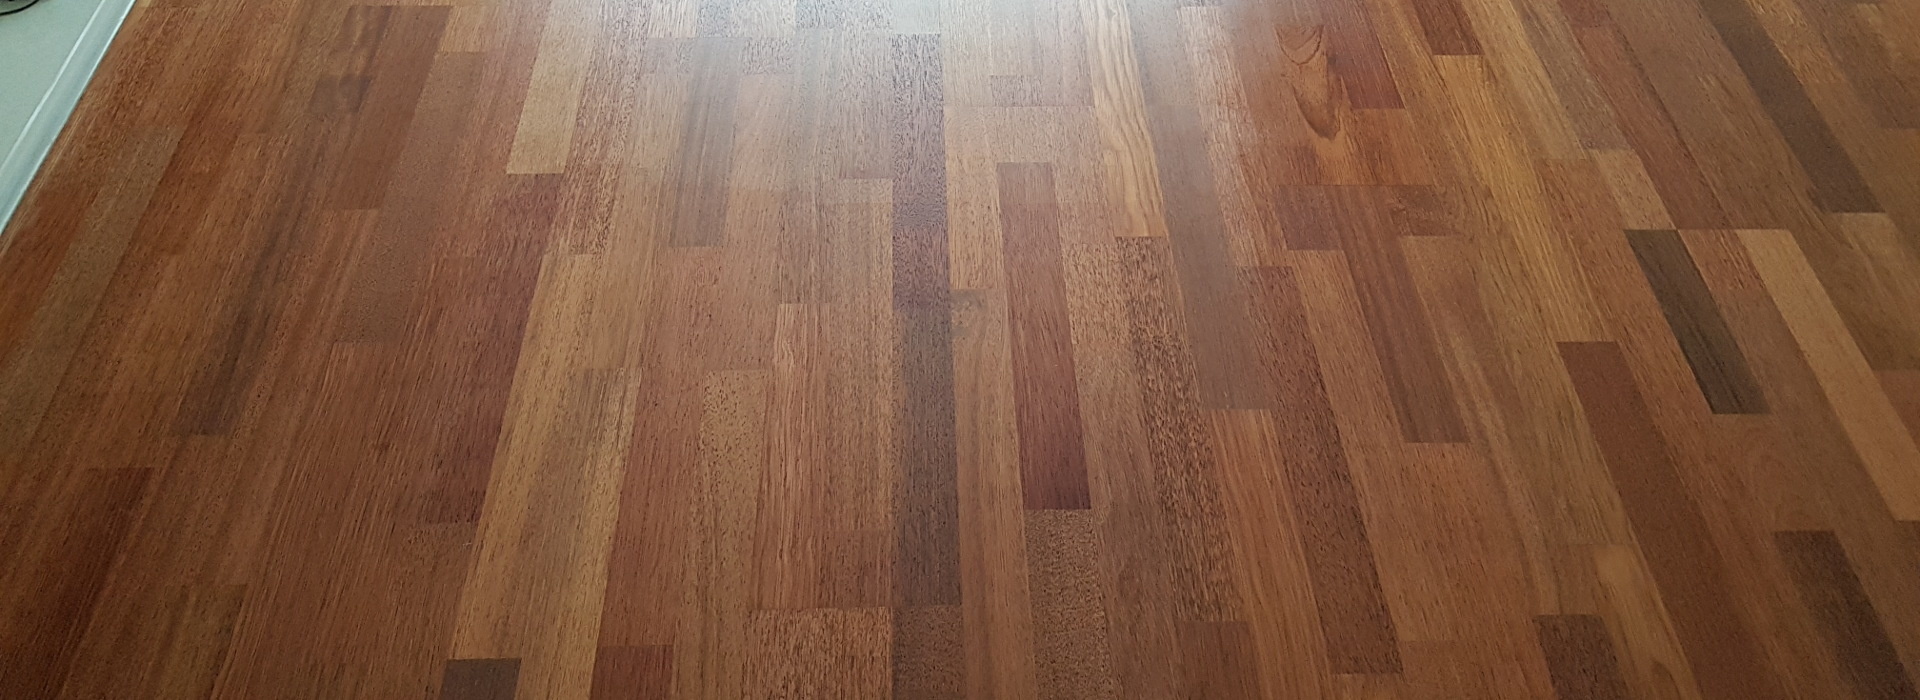 With the Floor sanding you can save up to 70% of new wood flooring